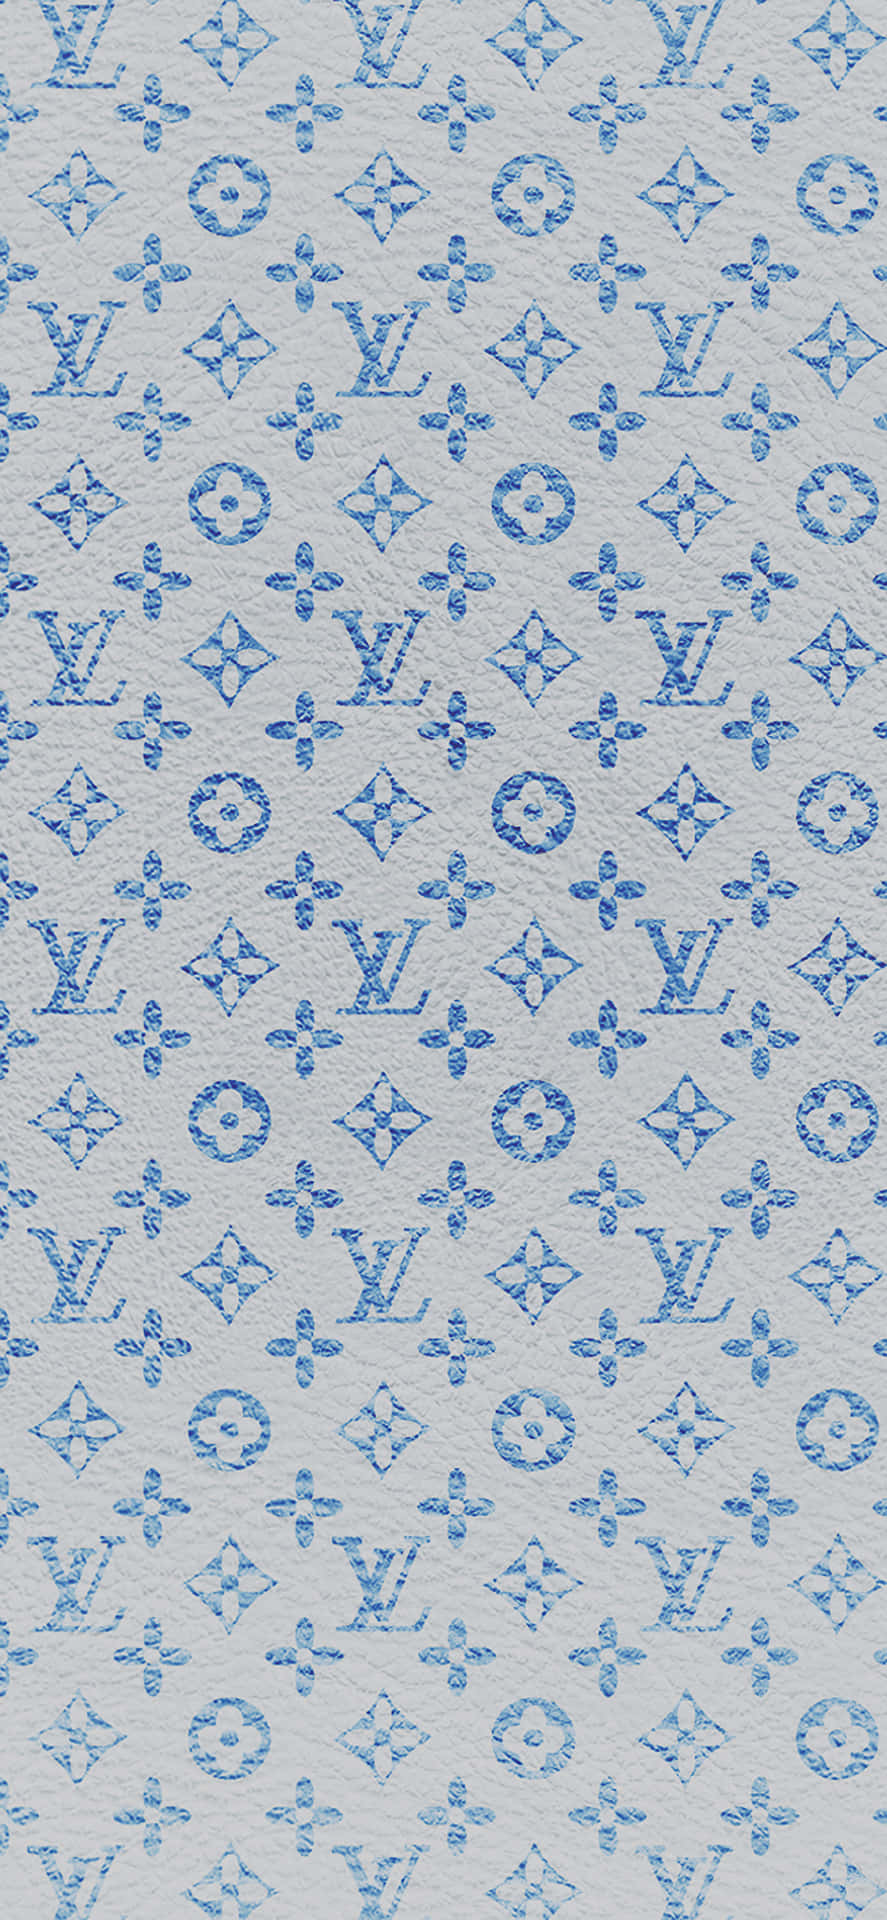 1080x1920 Louis Vuitton Wallpapers for IPhone 6S /7 /8 [Retina HD]